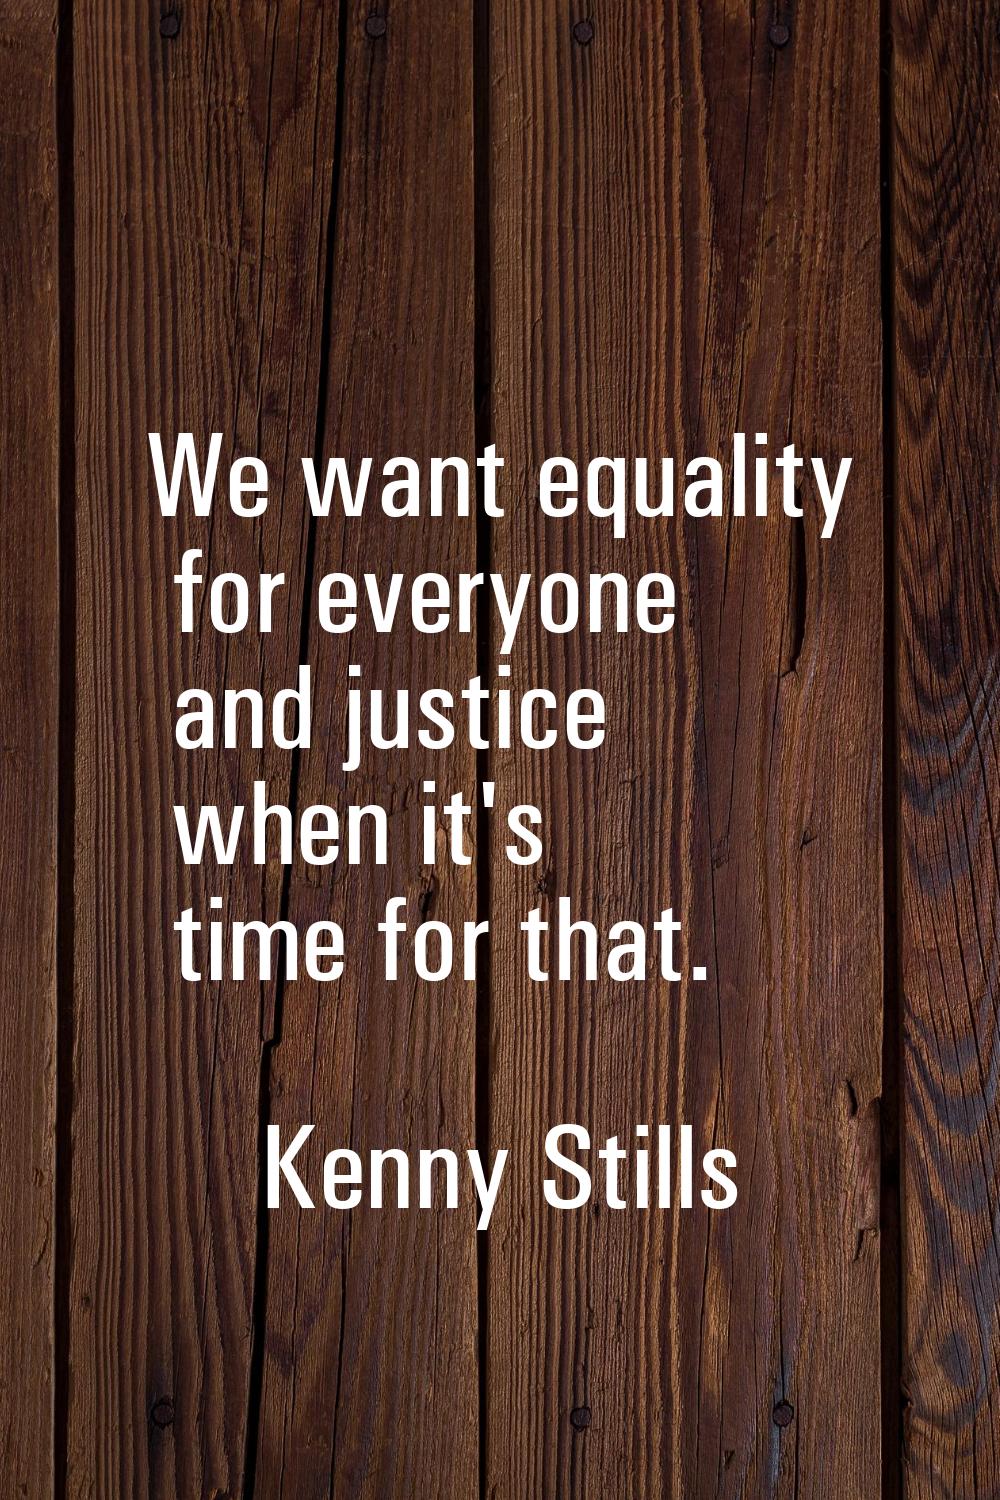 We want equality for everyone and justice when it's time for that.